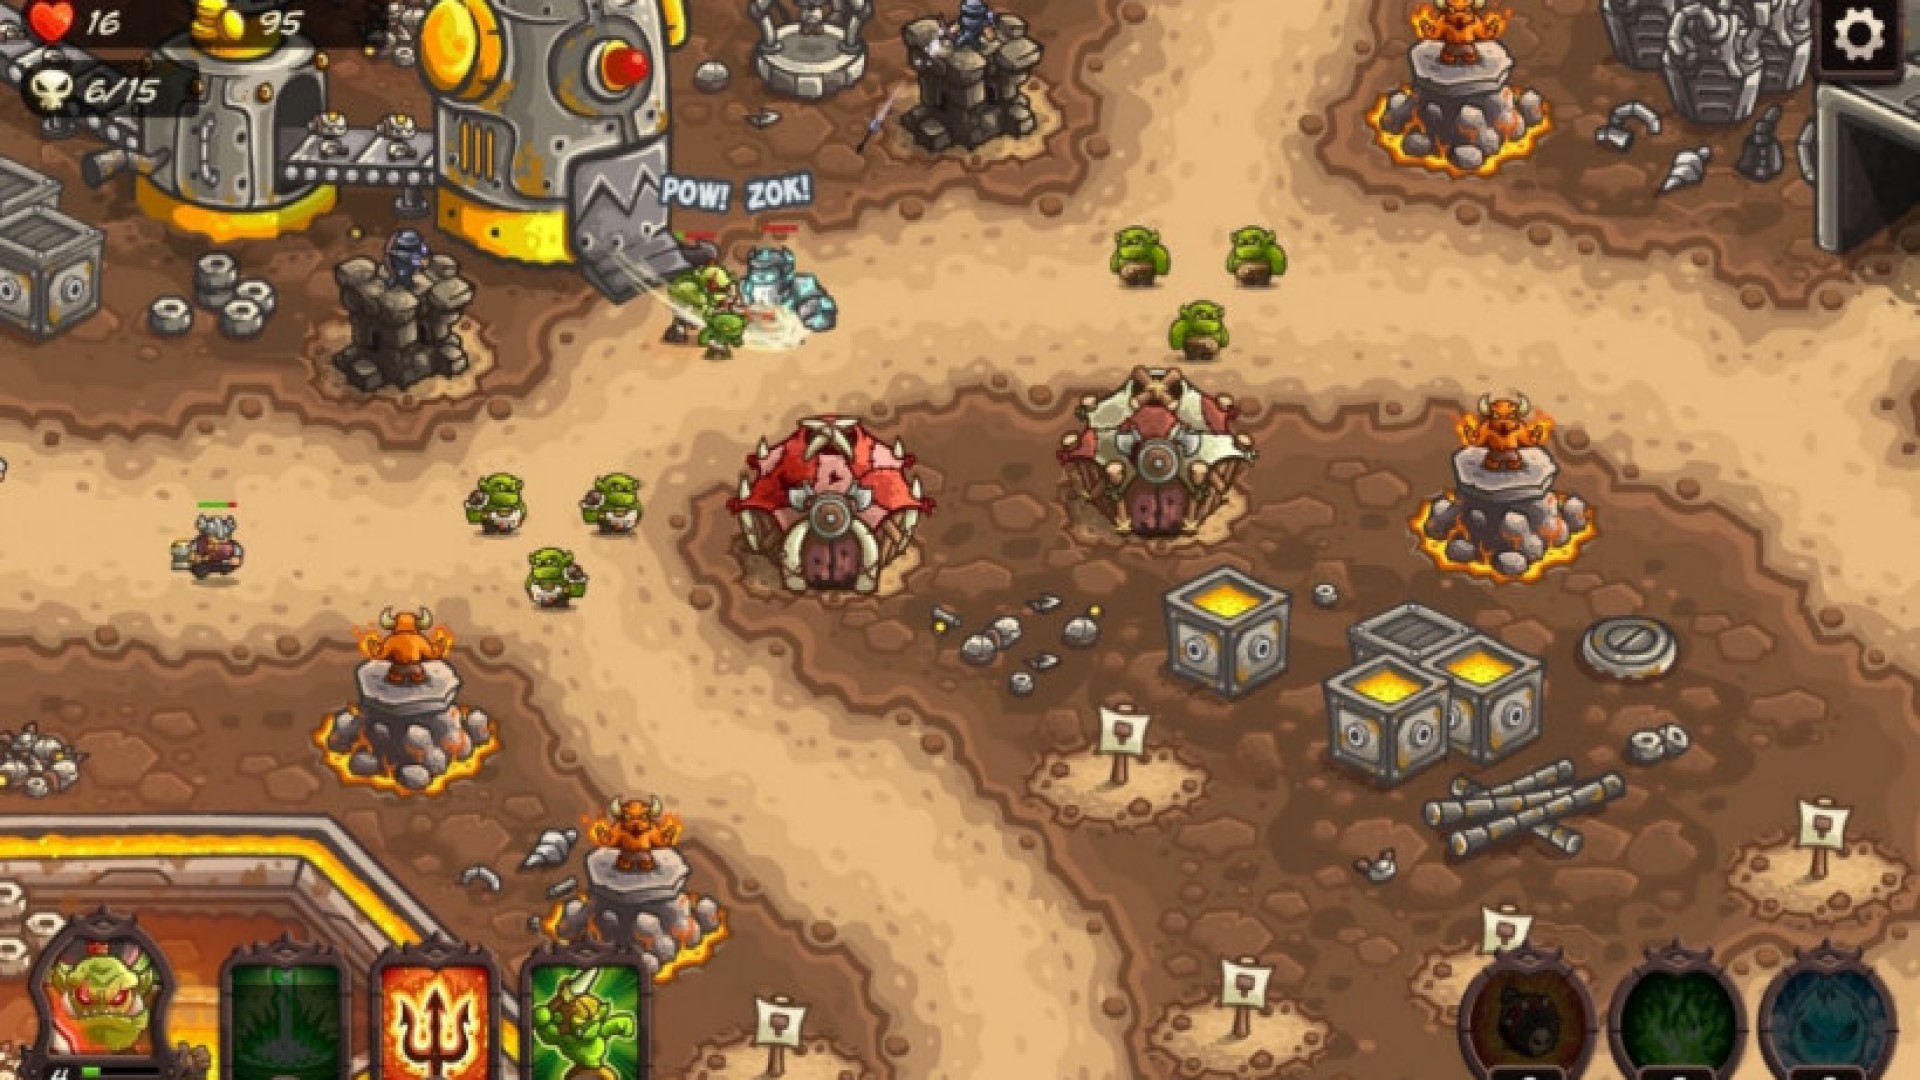 Best mobile strategy games: Kingdom Rush: Vengeance. Image shows orcs and other creatures attacking a base.